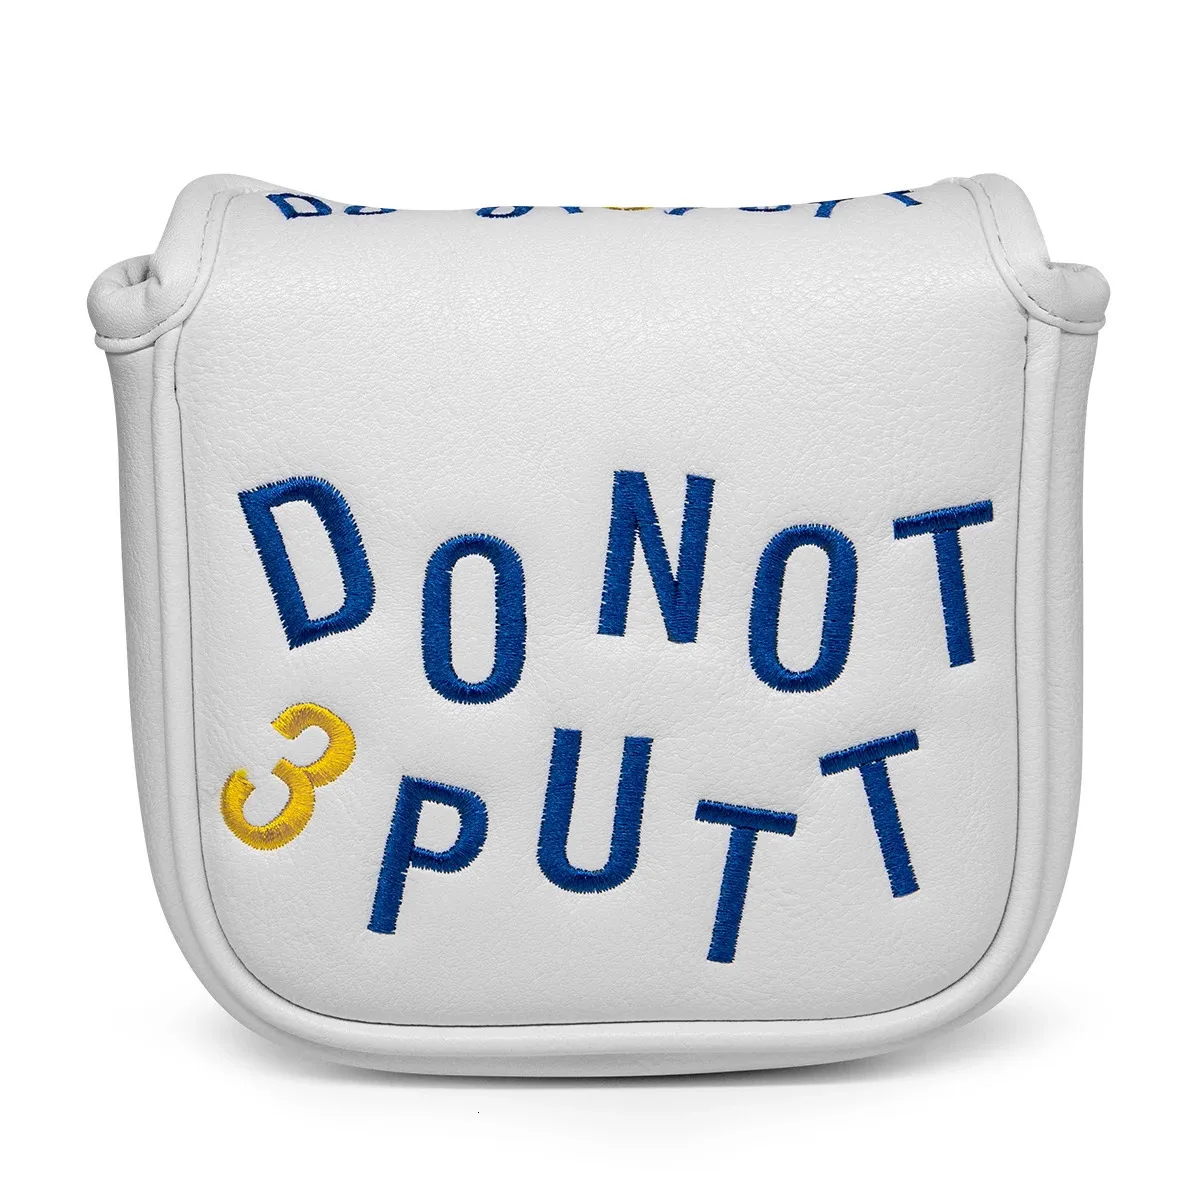 DO NOT 3PUTT Golf Mallet Putter Cover White Premium Leather for Headcover with Magnetic Closure Elegant Embroidery 240116